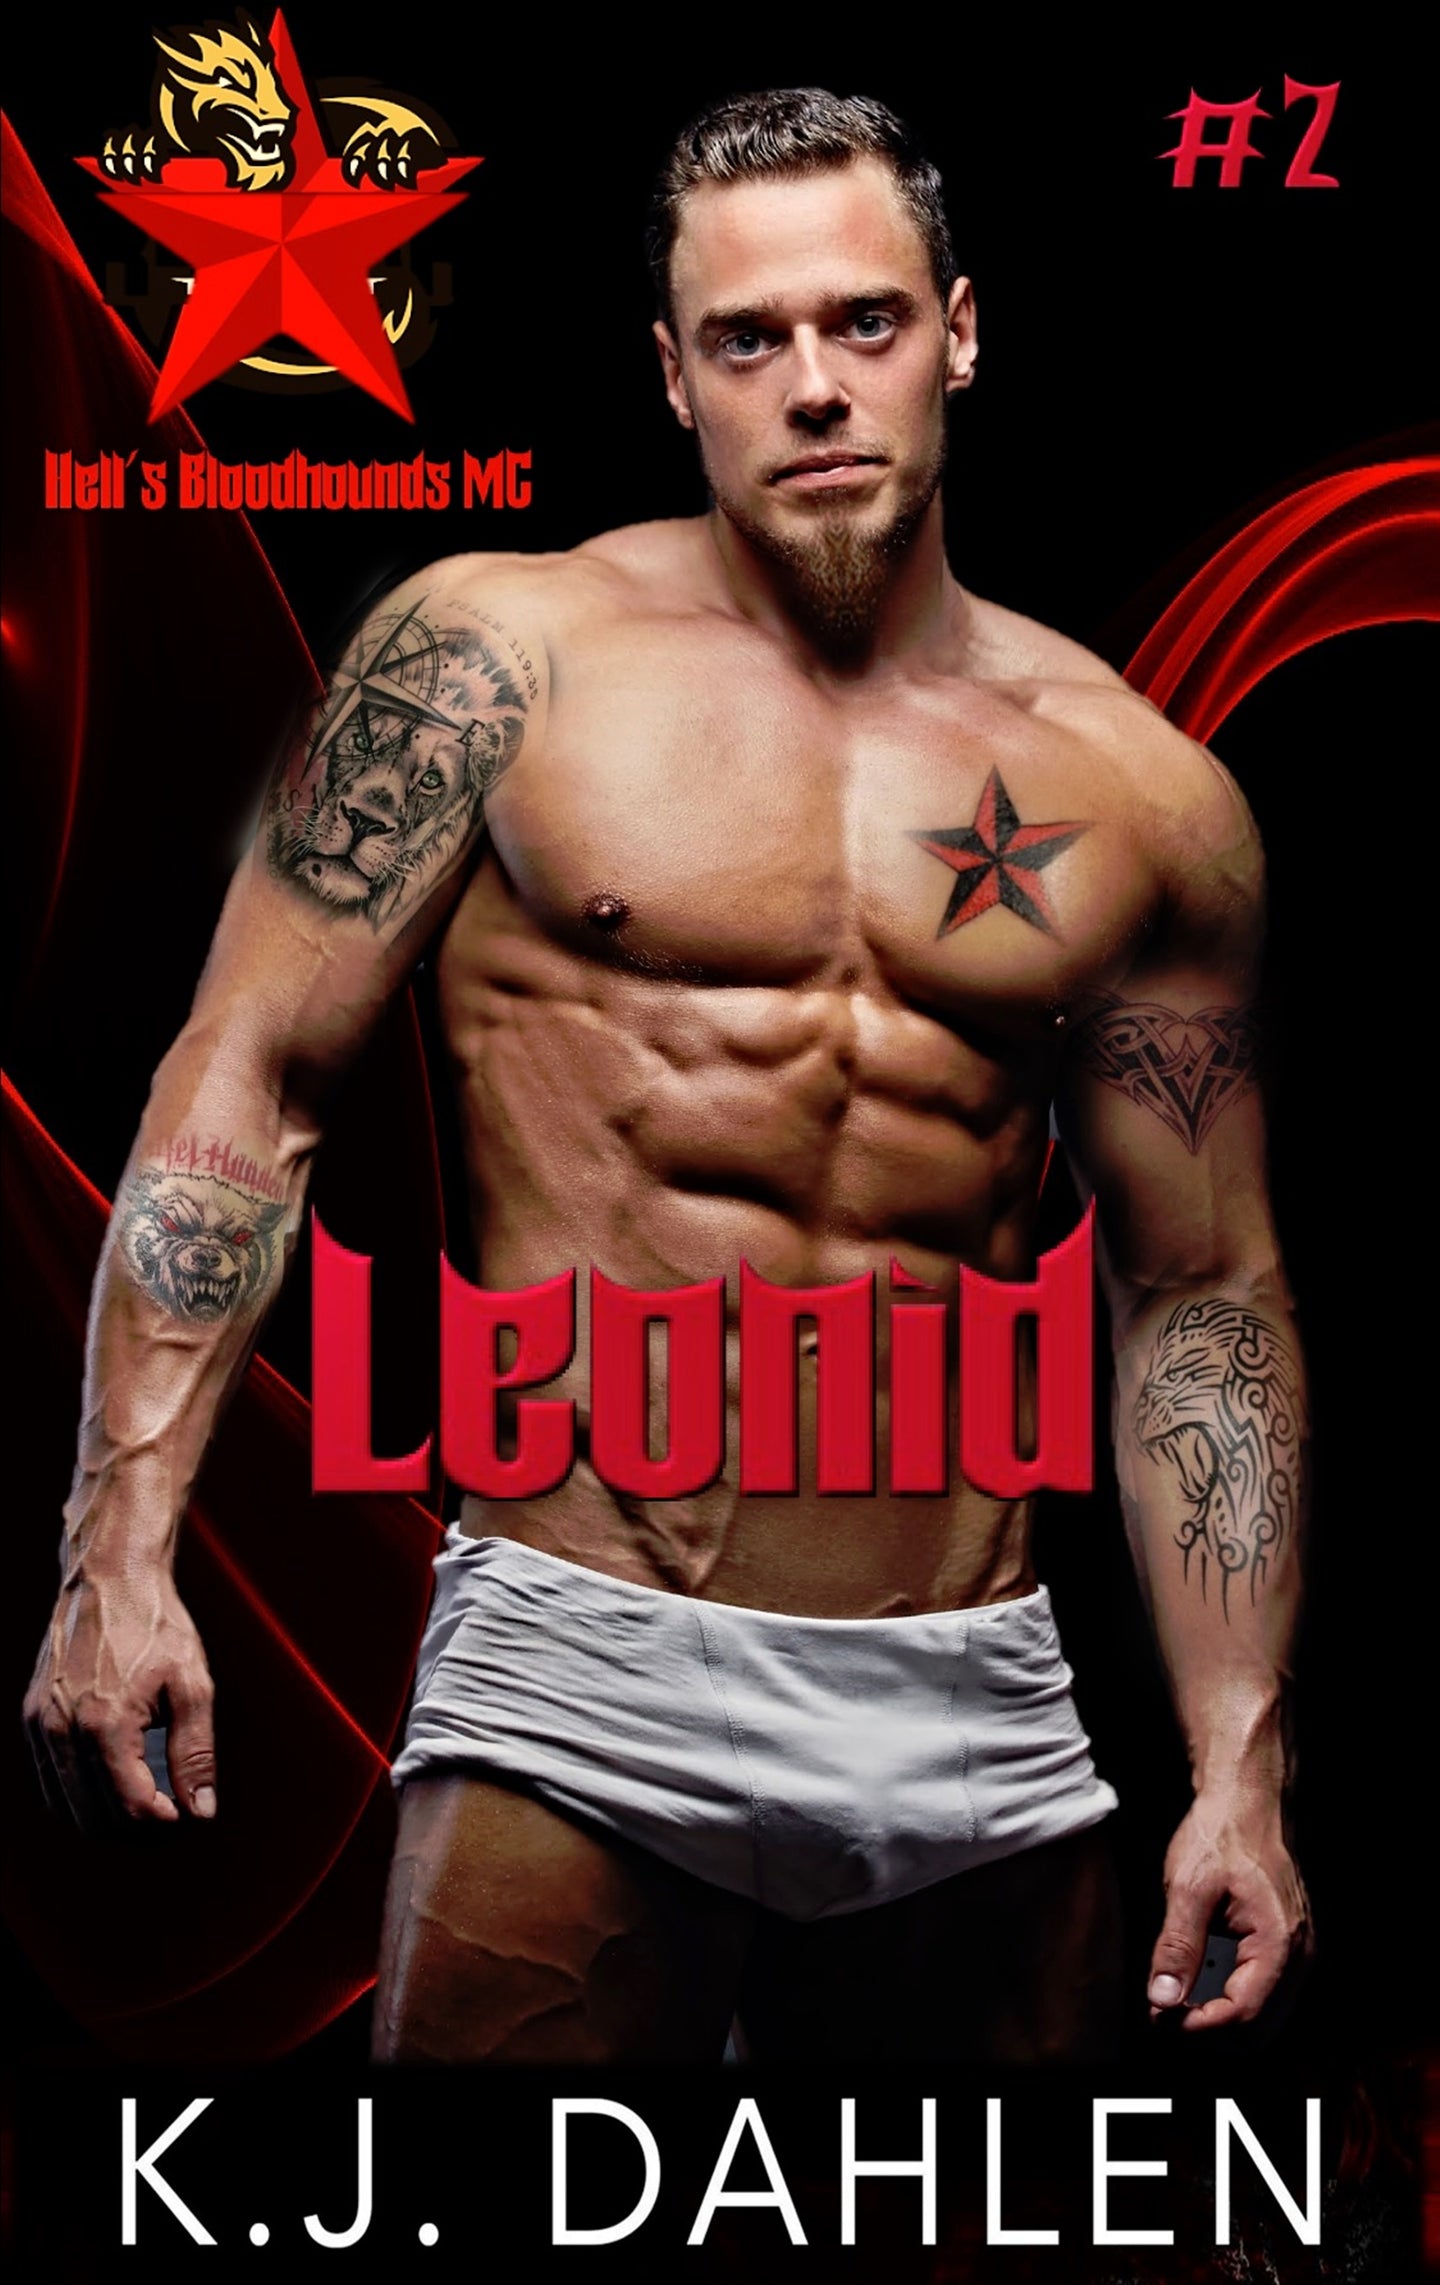 Leonid-Hell's-Bloodhounds-MC-#2-Single